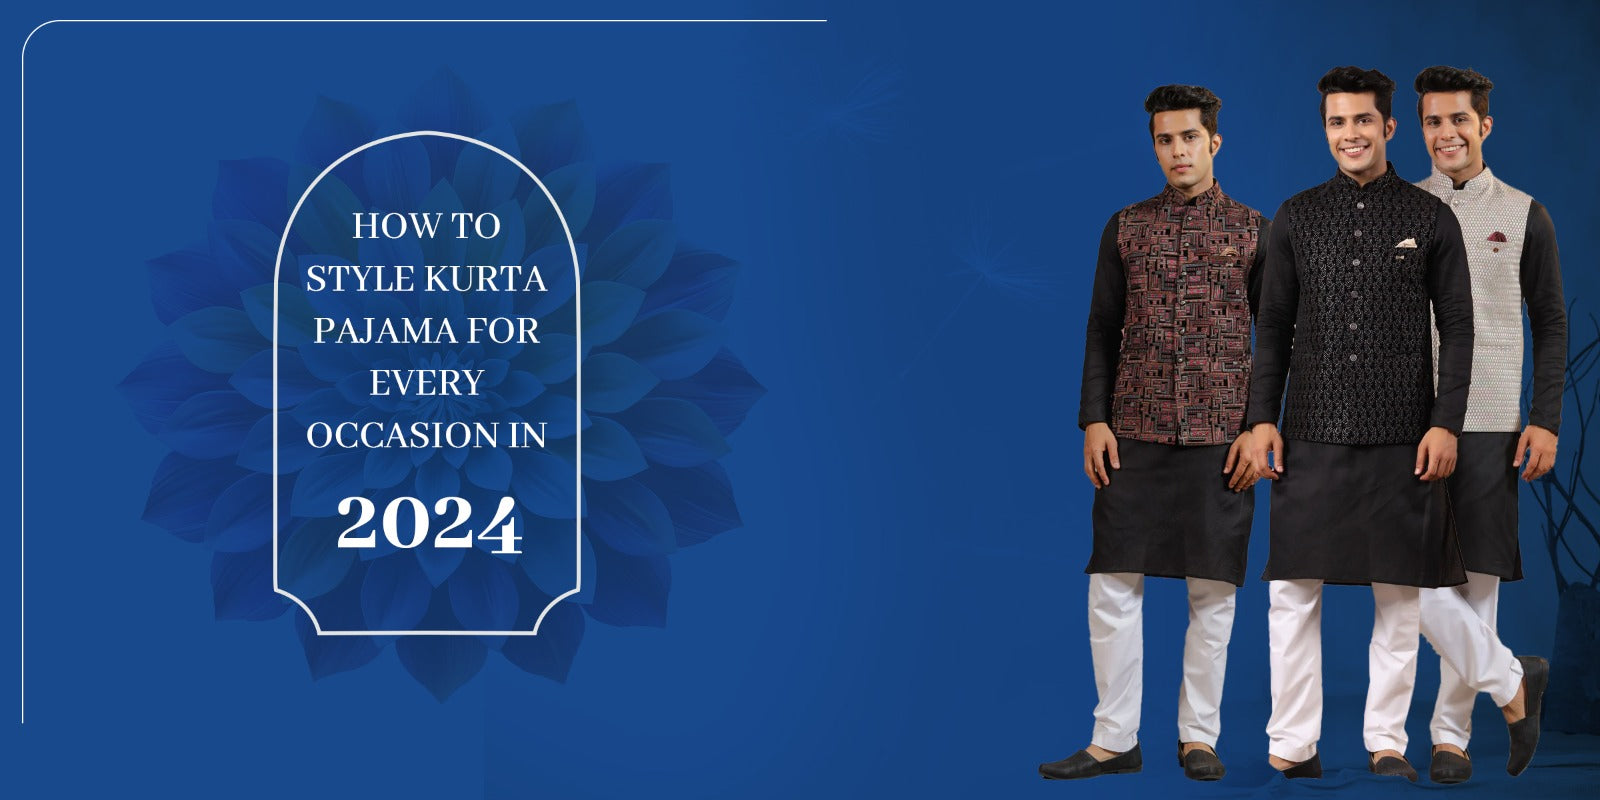 HOW TO STYLE KURTA PAJAMA FOR EVERY OCCASION IN 2024